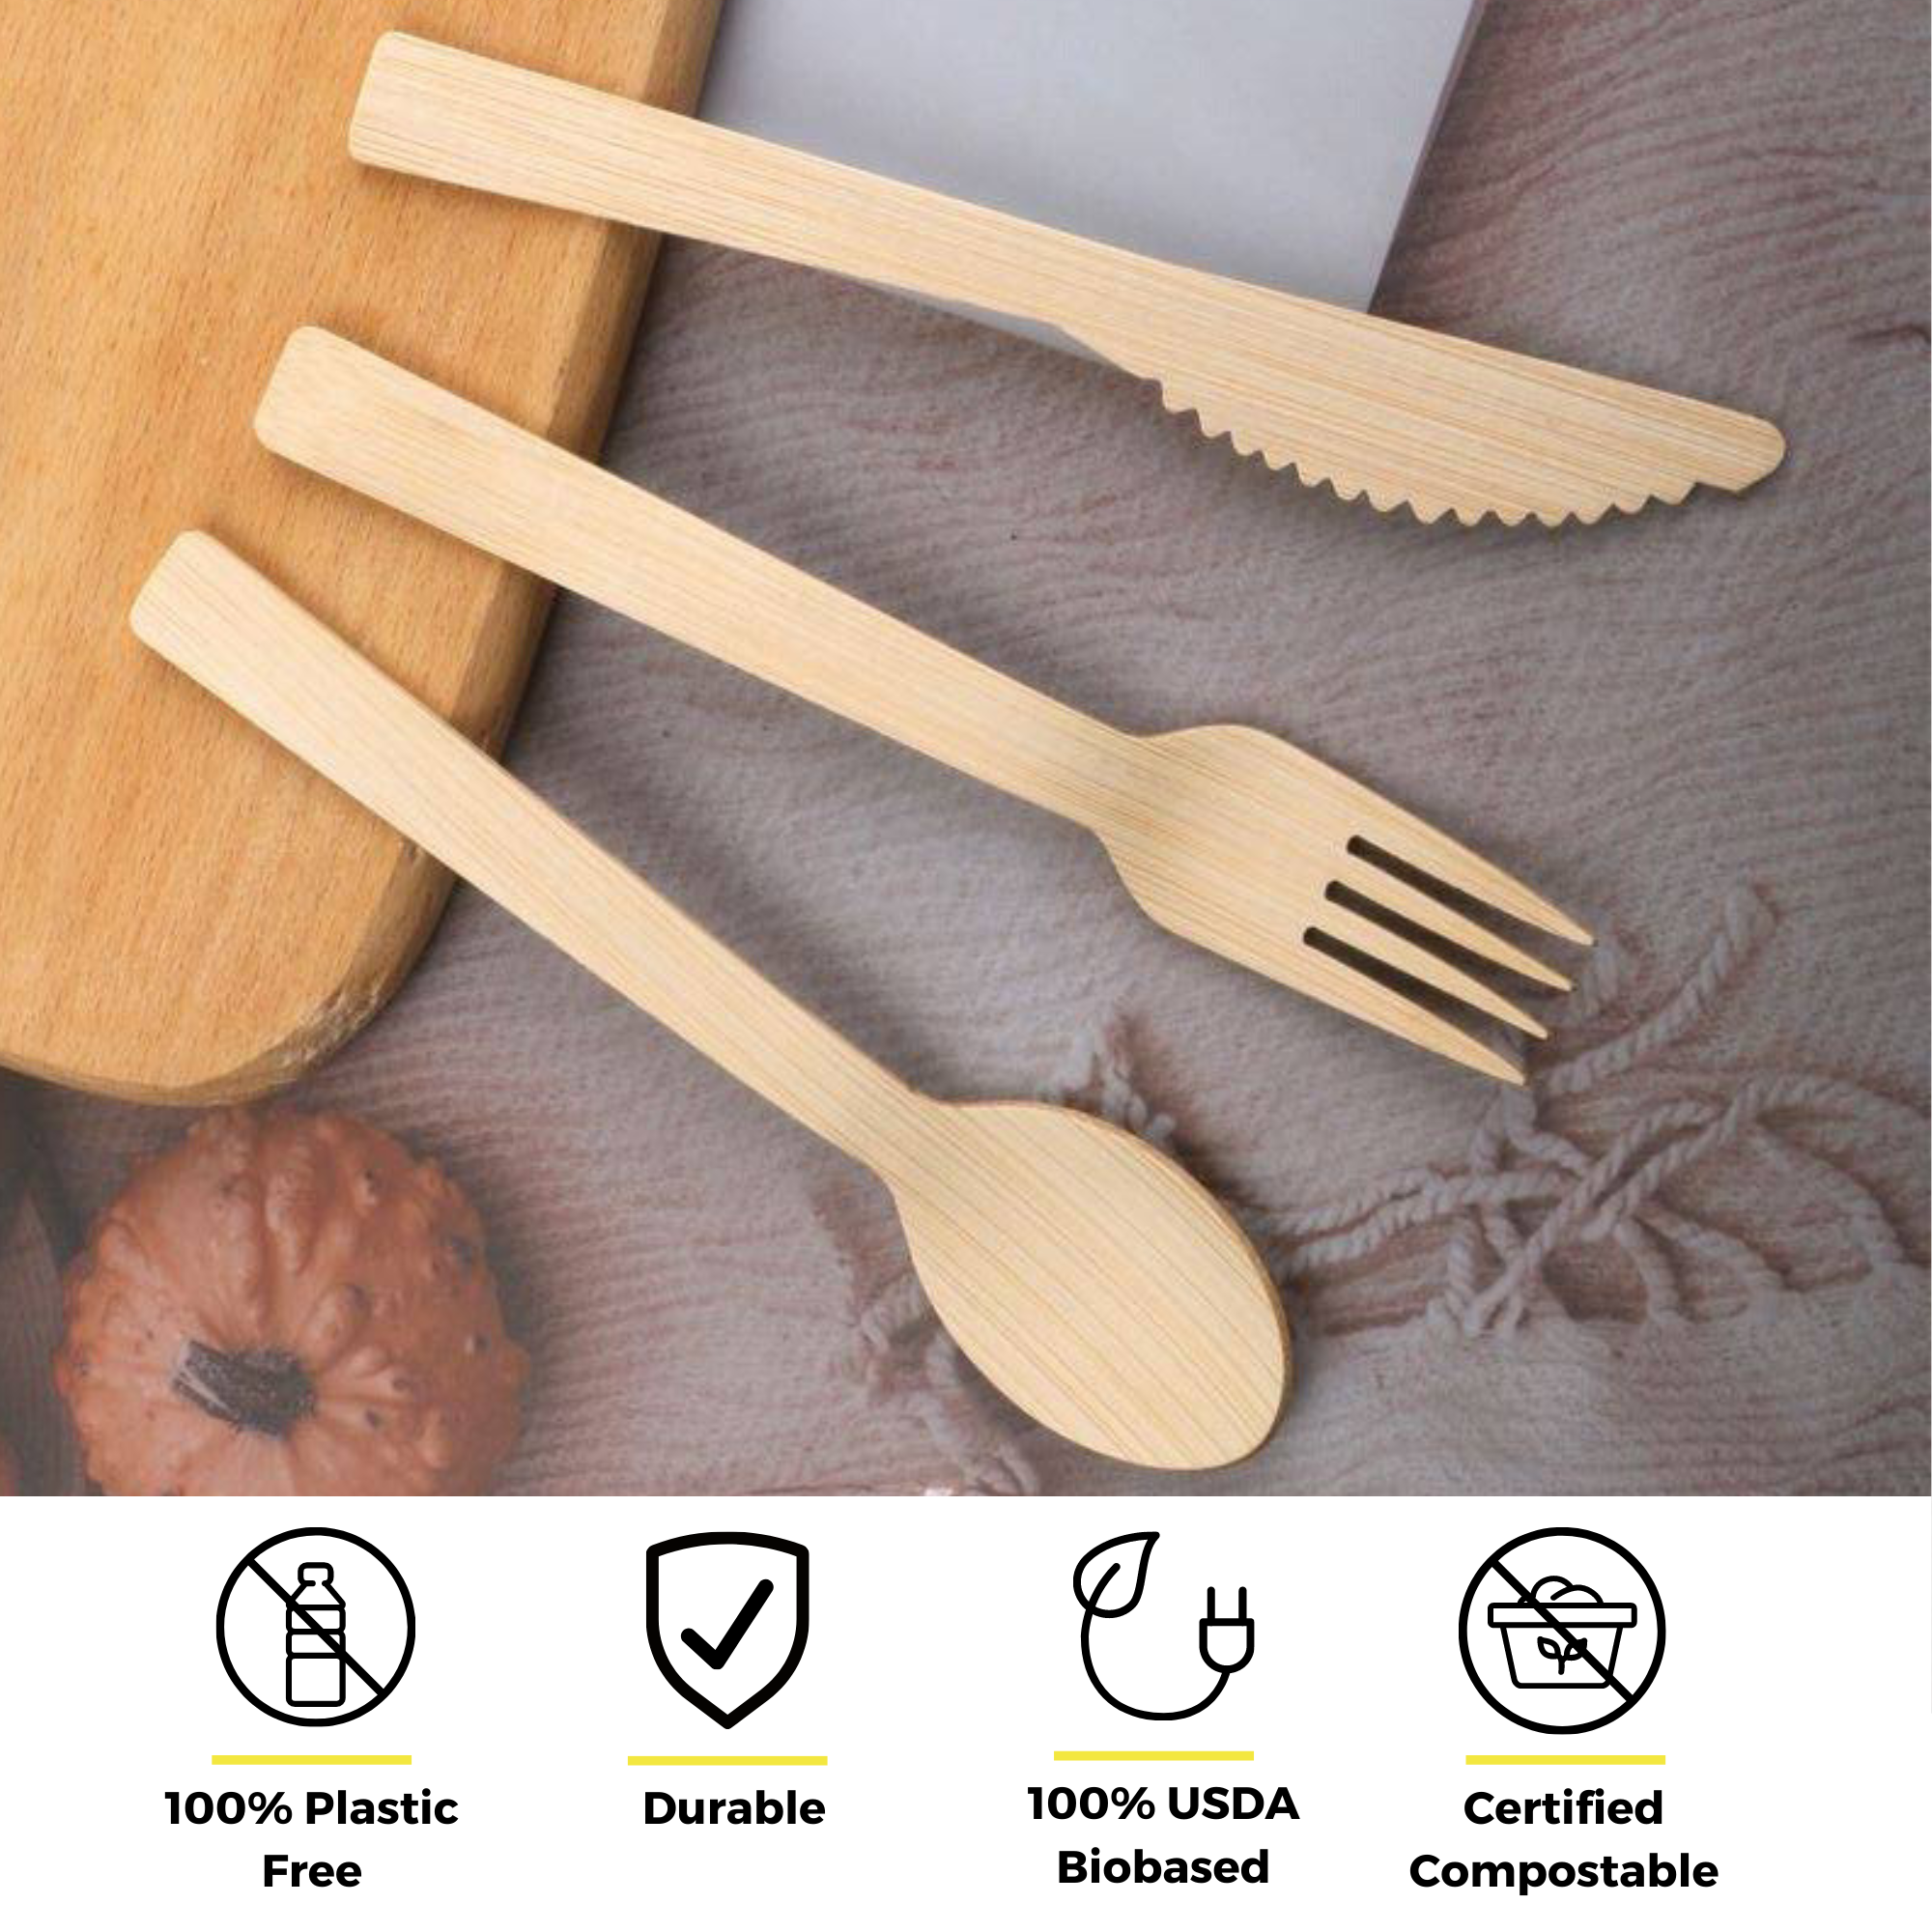 Sustainable bamboo cutlery by Holy City Straw Co., consisting of a spoon, fork, and knife, laid out on a fabric surface with a rolling pin partially visible. The image is accentuated with icons indicating the product's eco-friendly attributes: 100% Plastic Free, Durable, 100% USDA Biobased, and Certified Compostable.